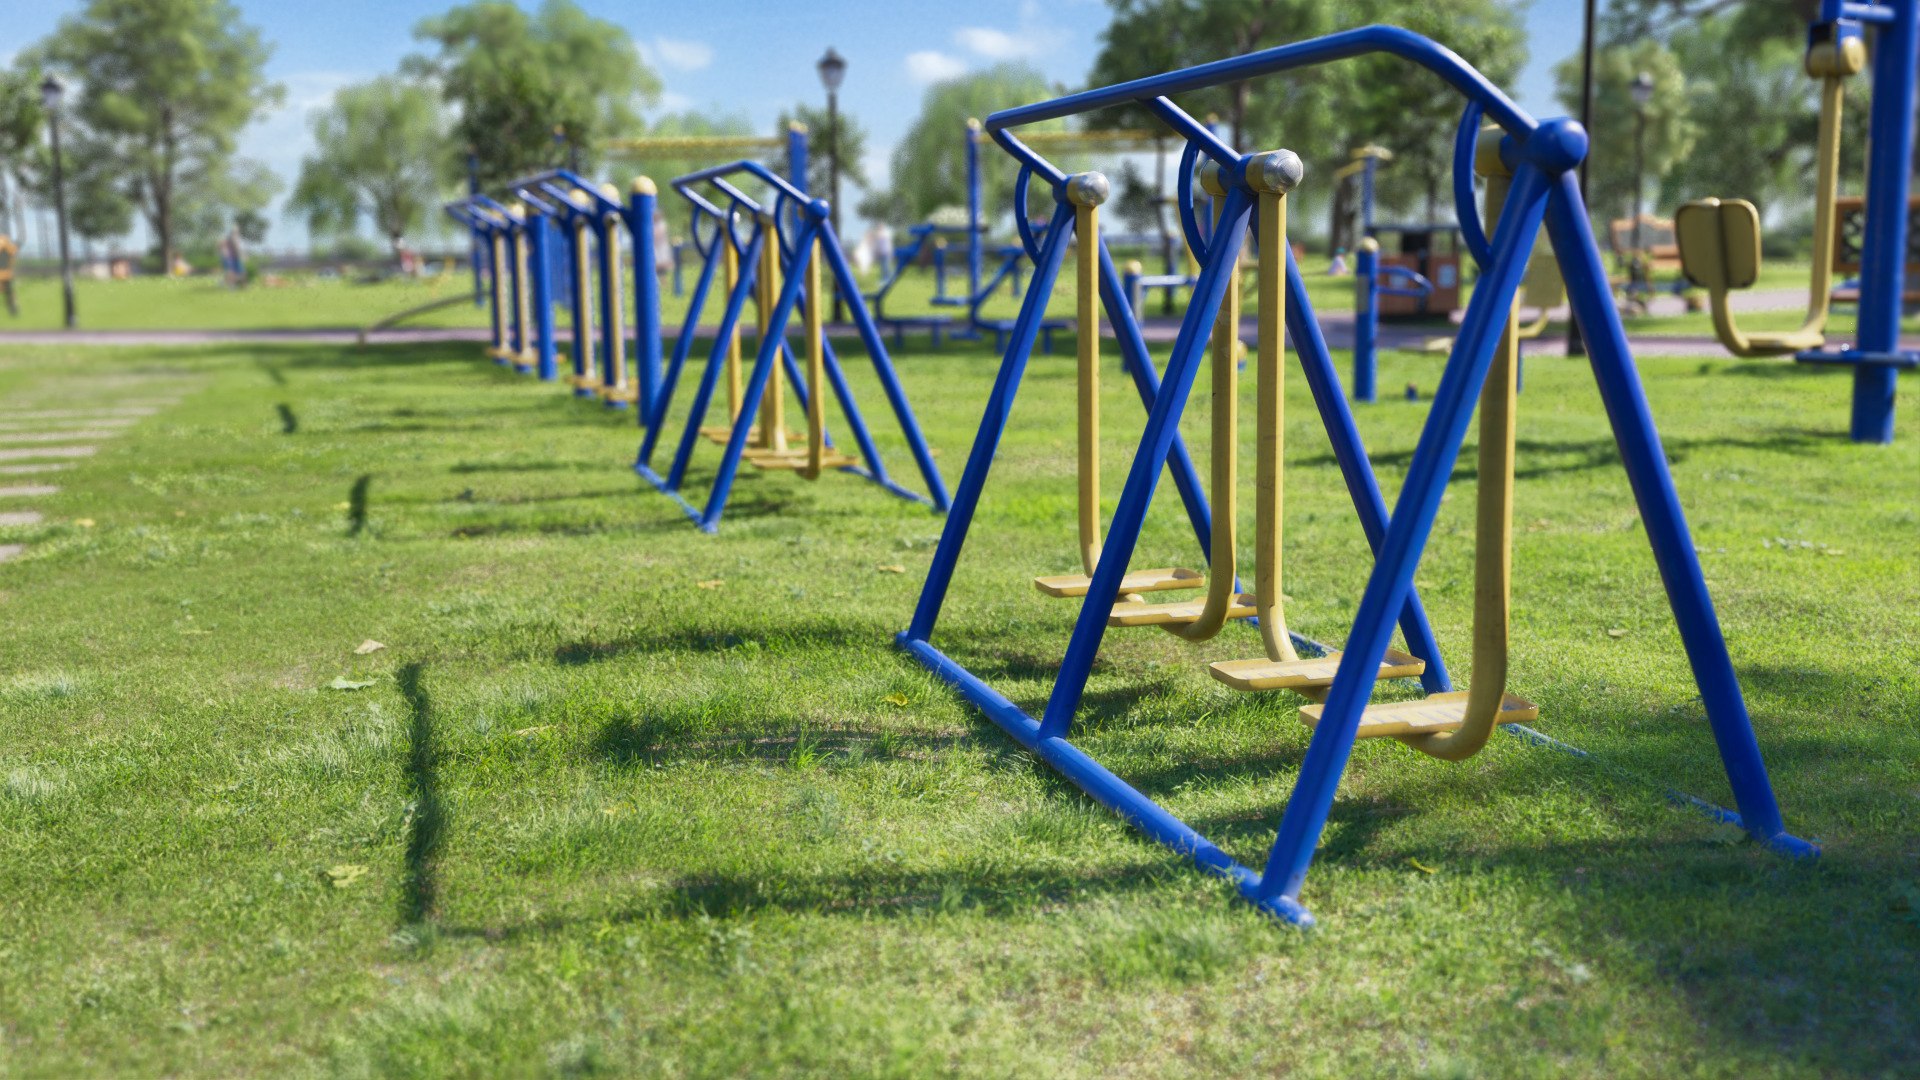 Why Are More Communities Investing in Outdoor Fitness?